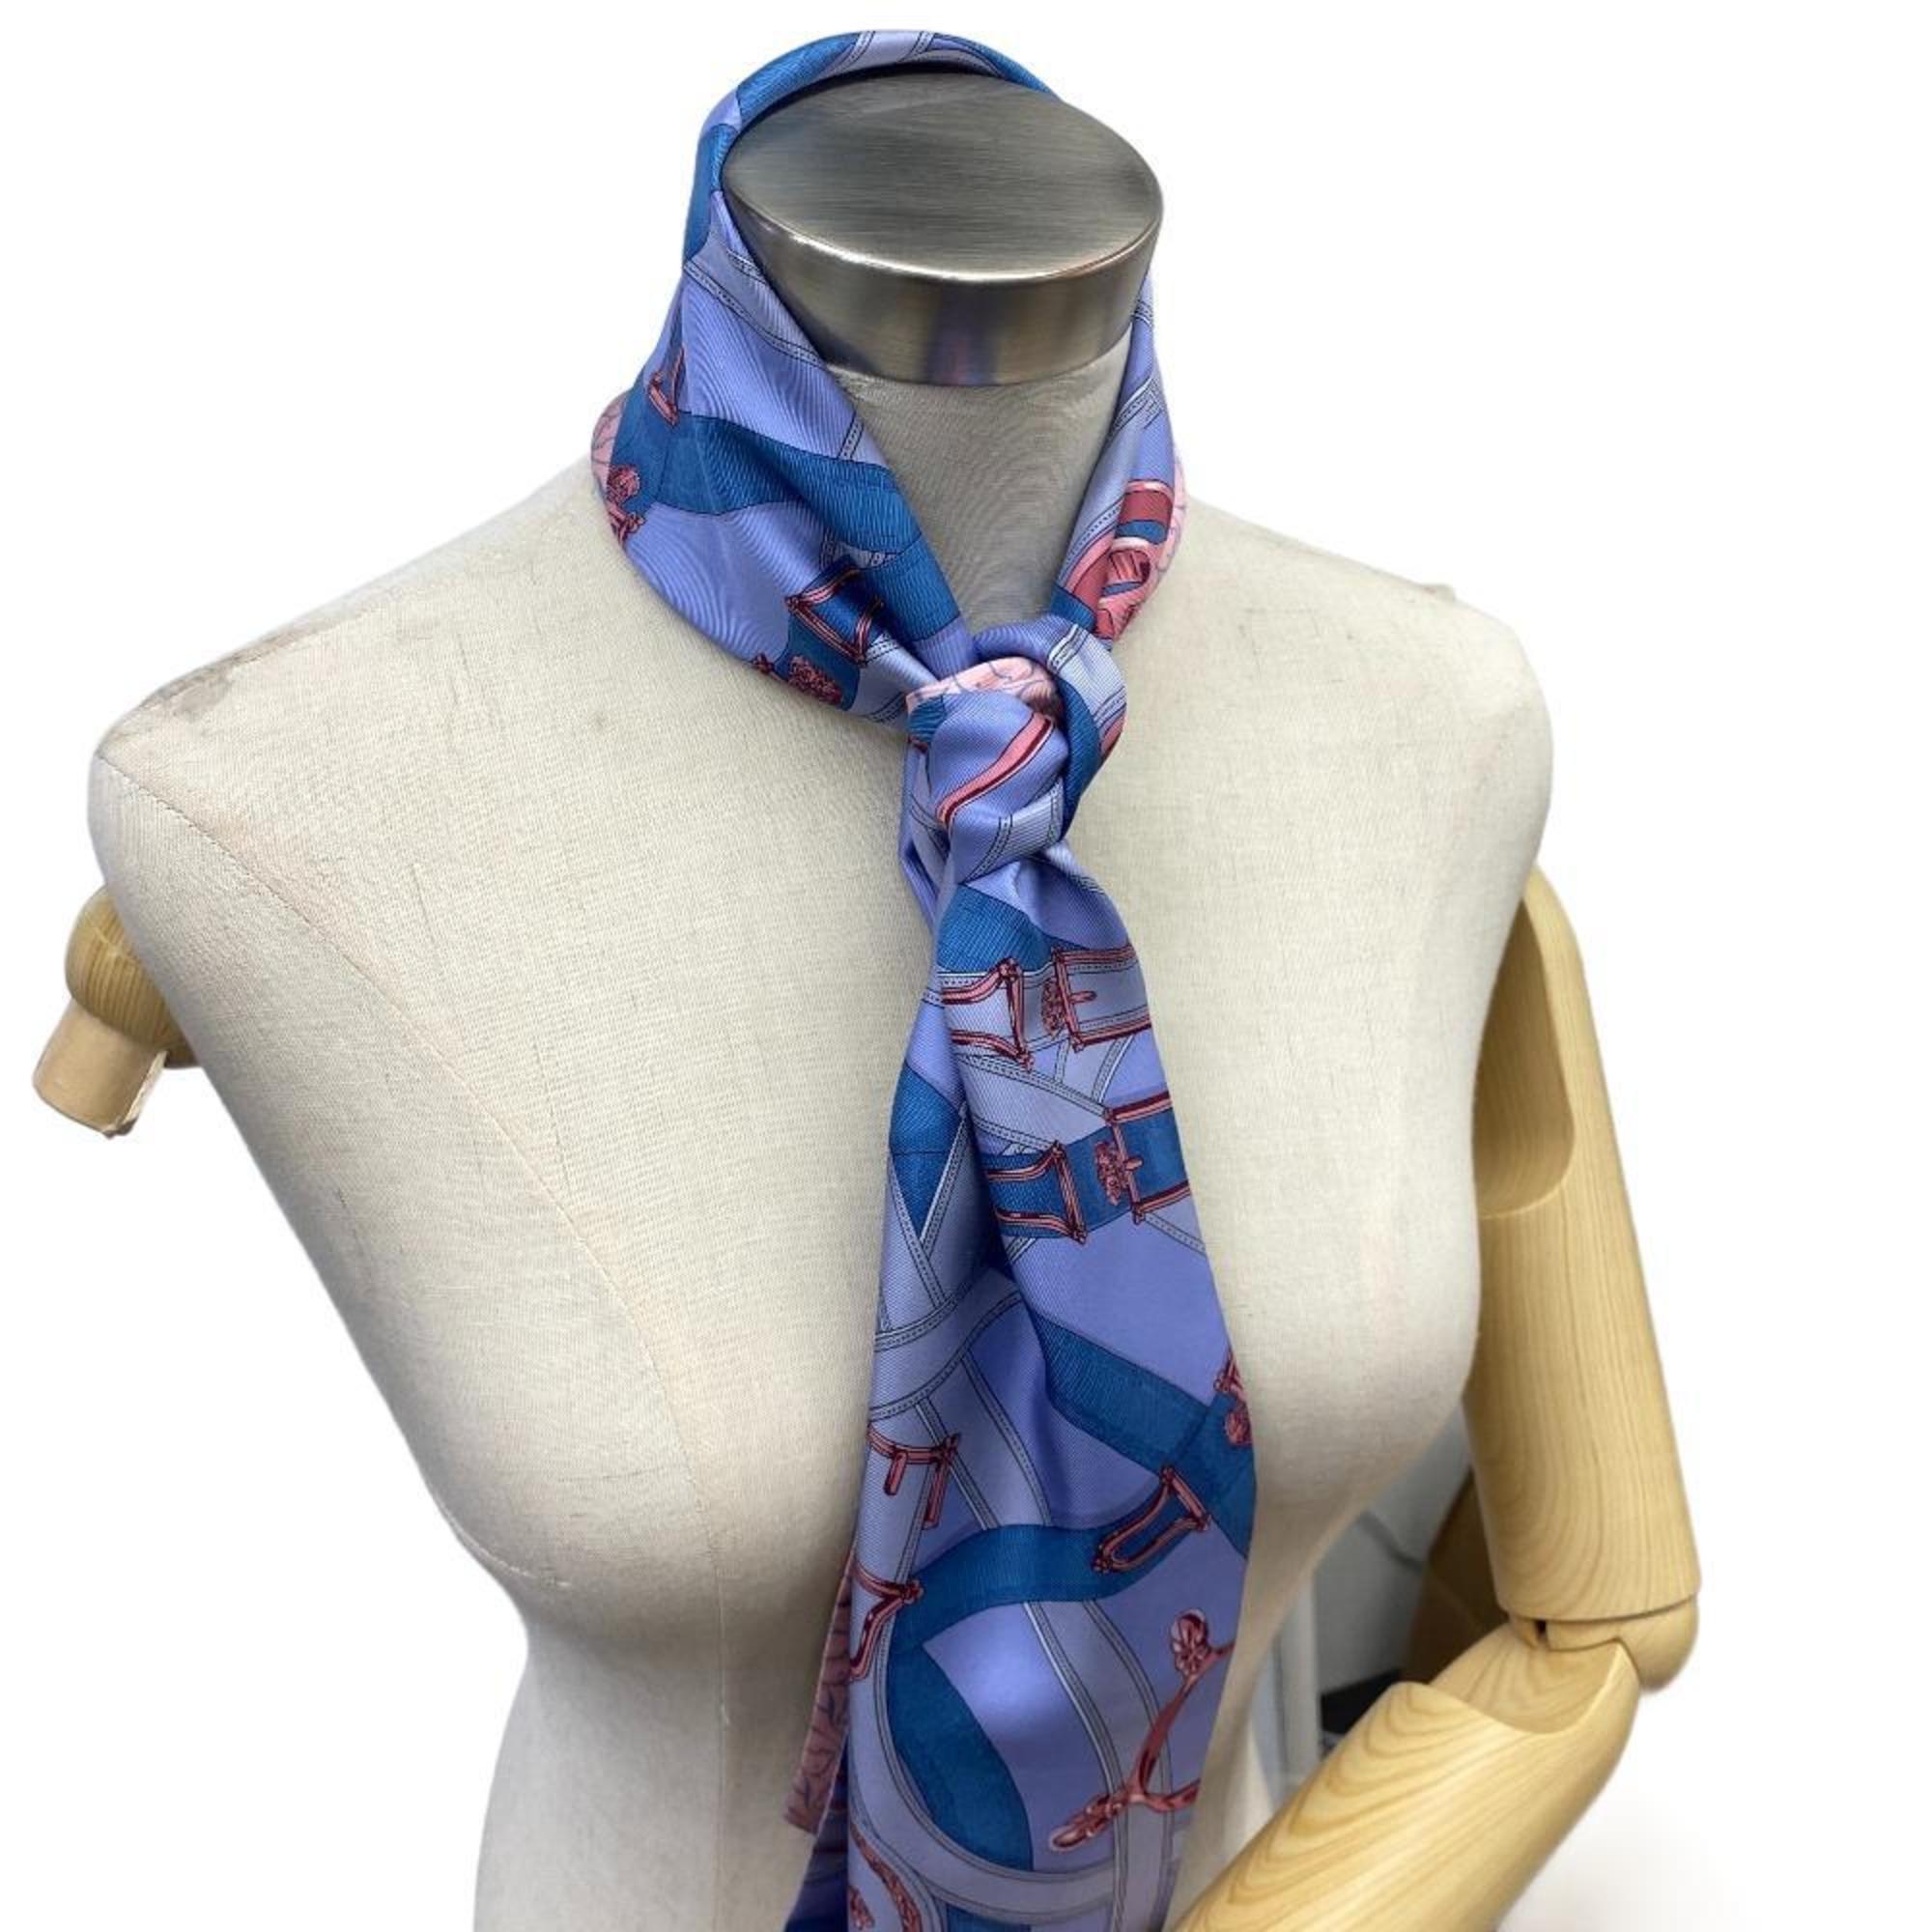 HERMES Maxi Twilly Rose Horse Cavalcadour Scarf Muffler Lavender Women's